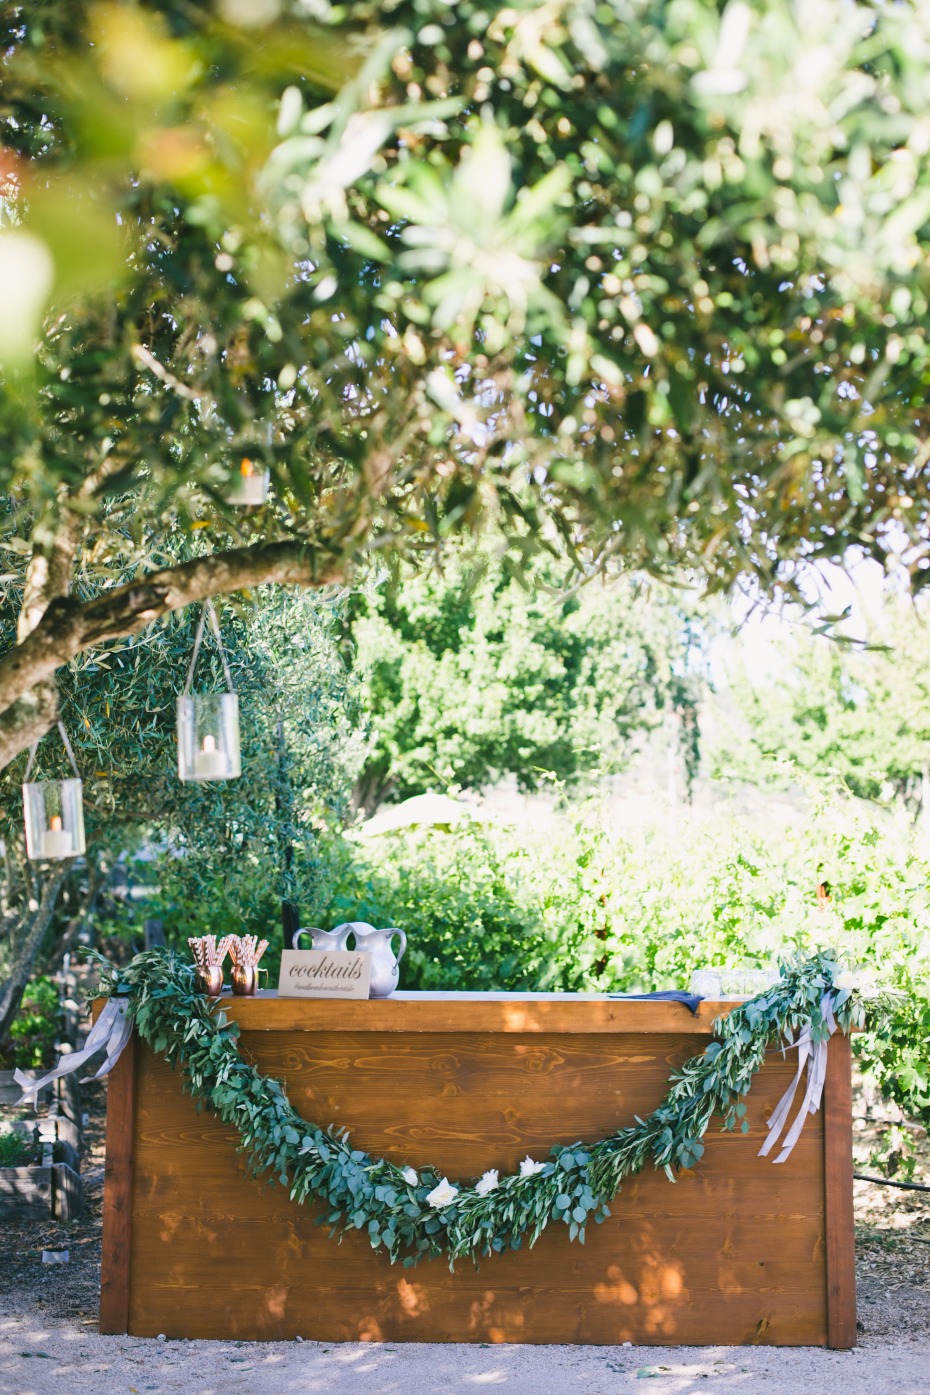 Rustic bar with garland